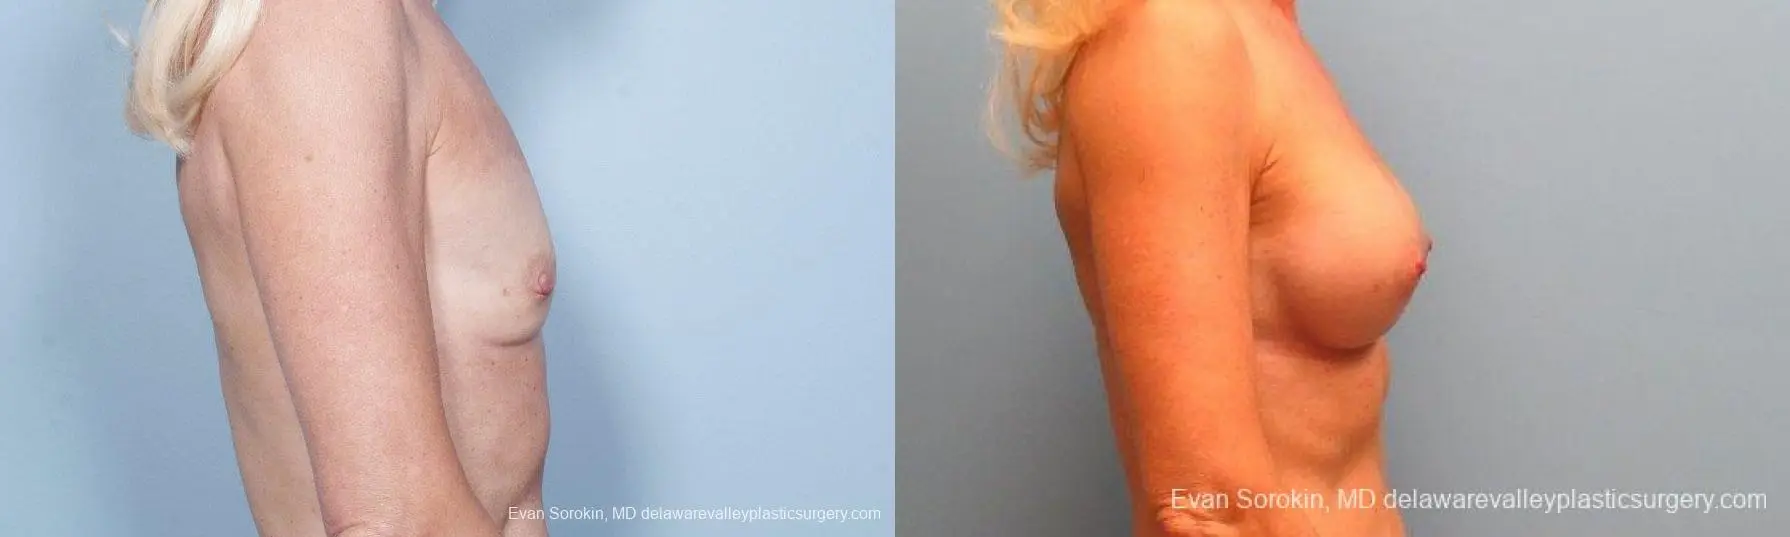 Philadelphia Breast Augmentation 9415 - Before and After 3